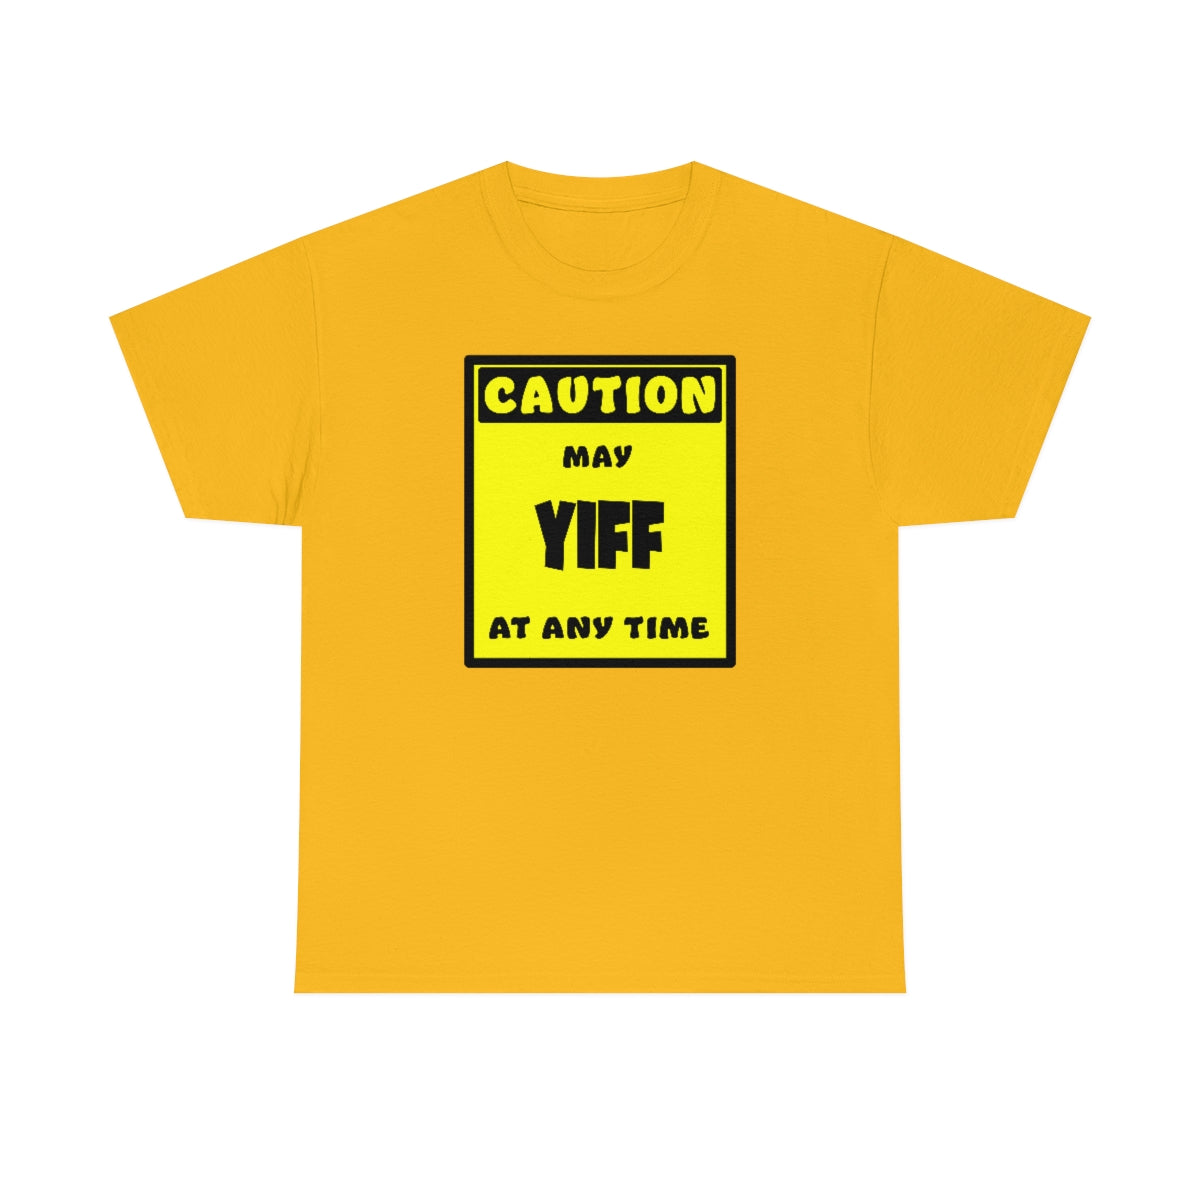 CAUTION! May YIFF at any time! - T-Shirt T-Shirt AFLT-Whootorca Gold S 